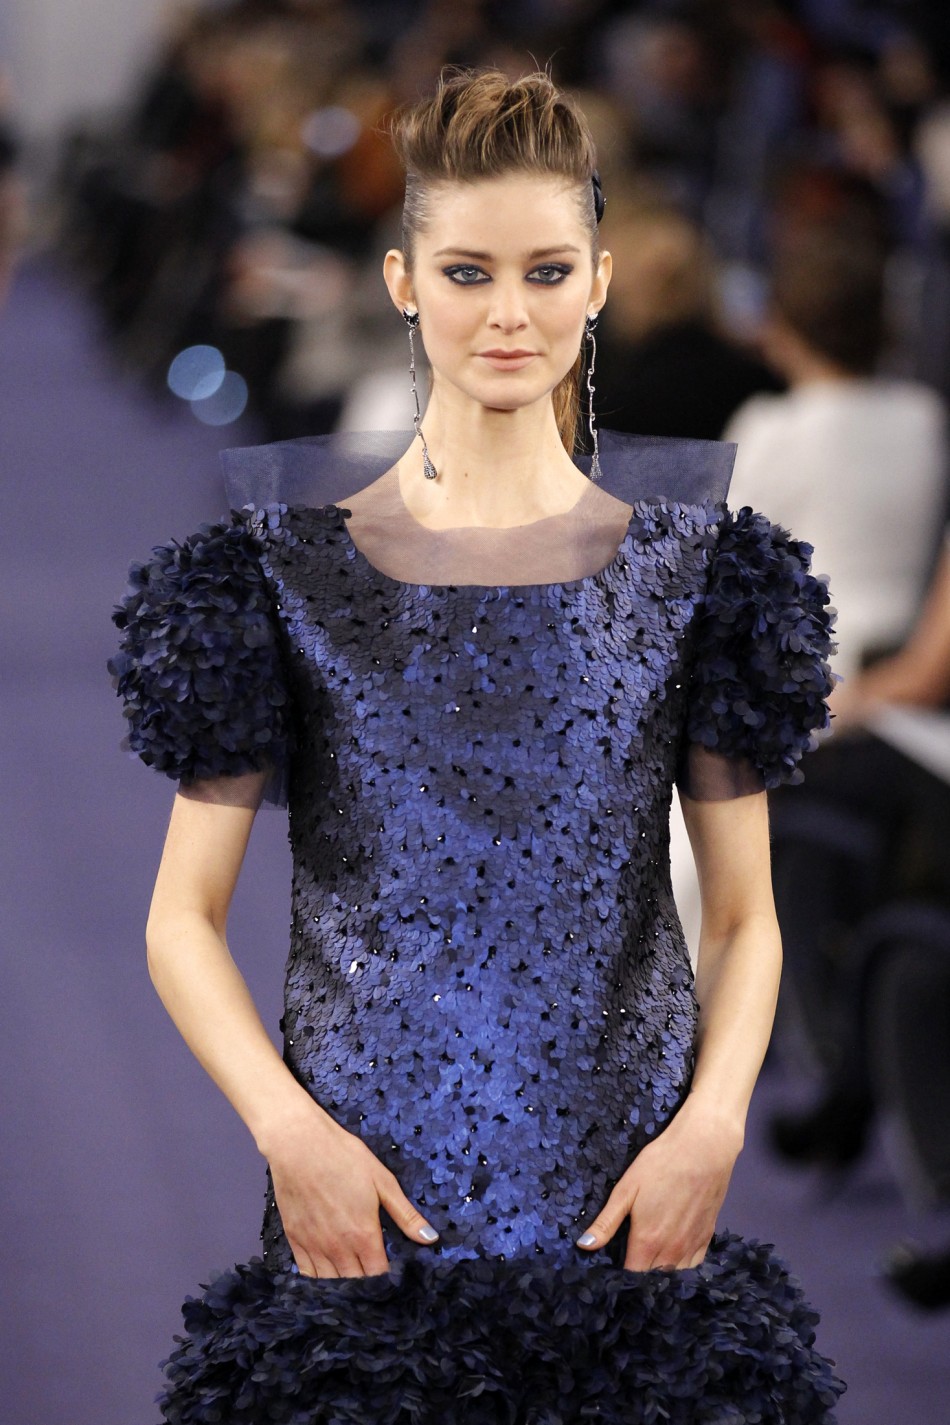 Paris Fashion Week: Chanel Spreads its Wings for High Couture [PHOTOS]